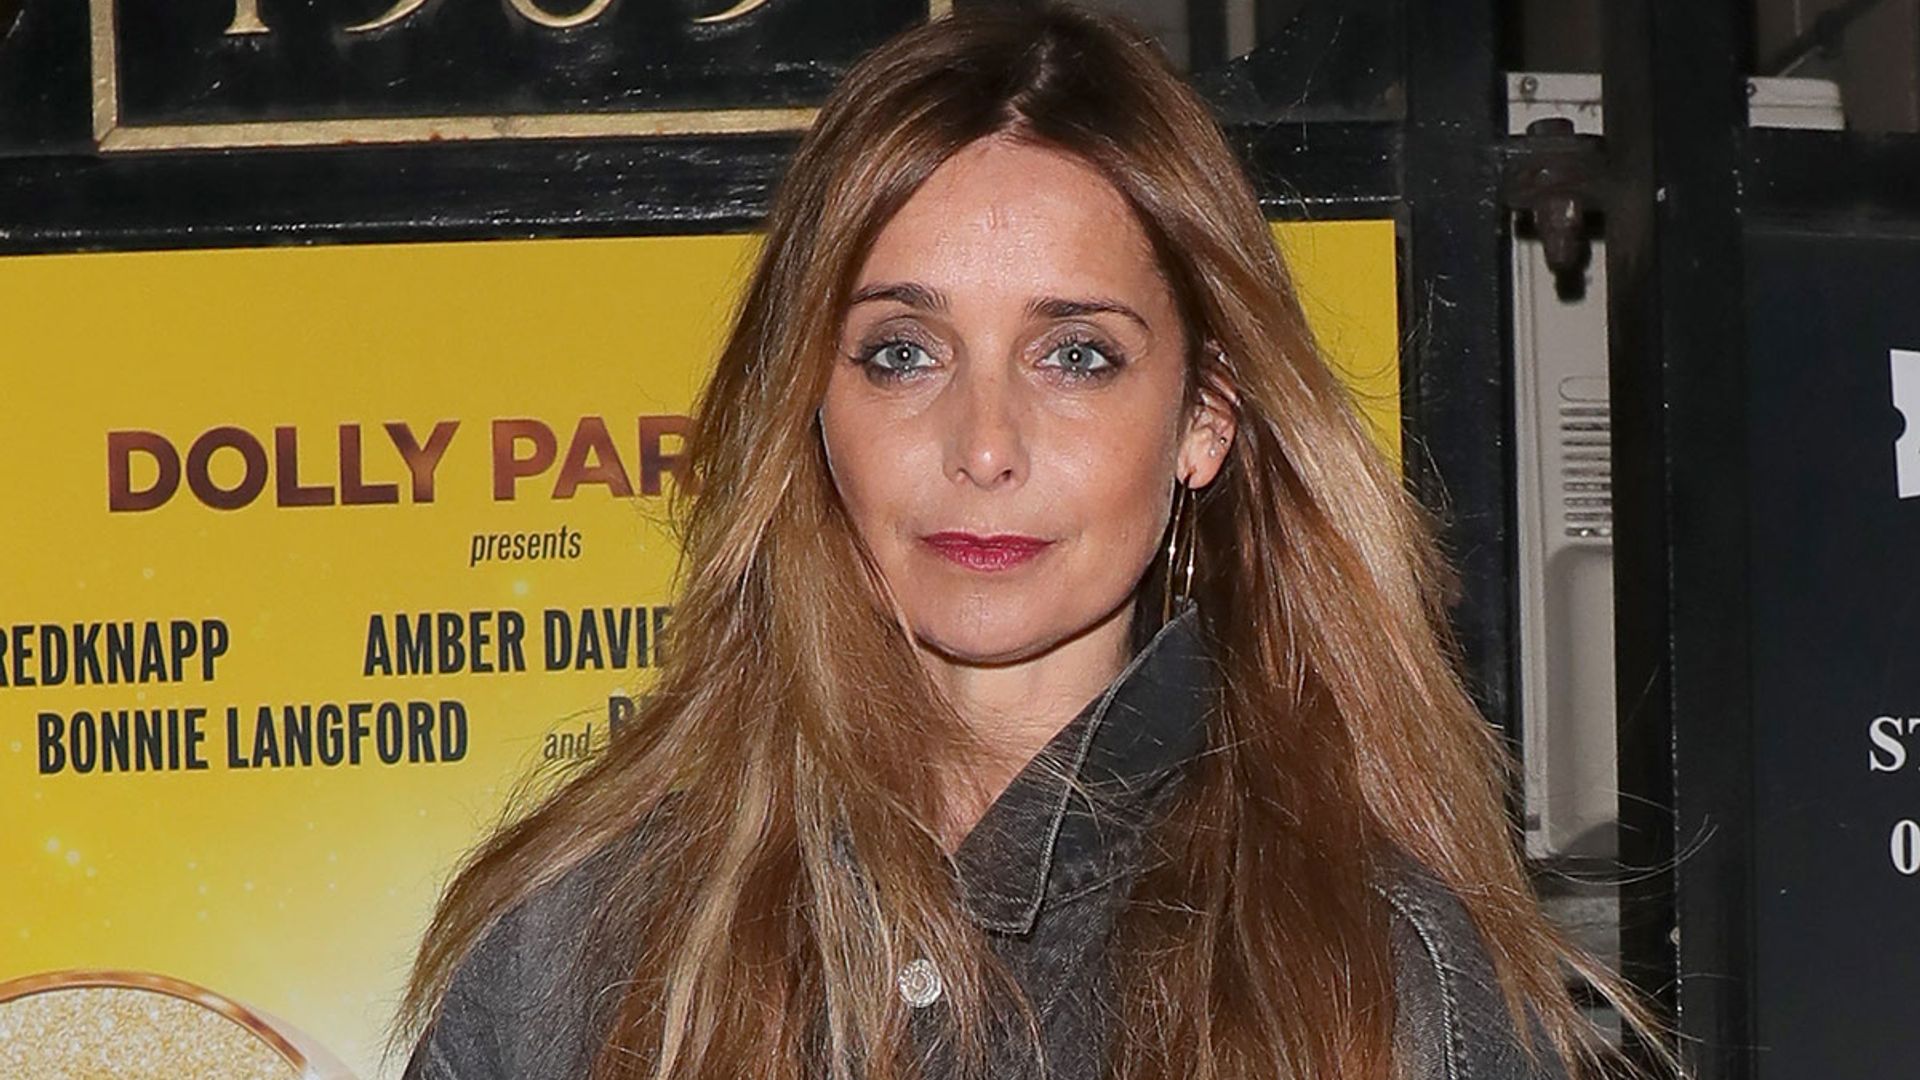 Louise Redknapp shares heartbreaking message about love: 'Remember when we had it all'